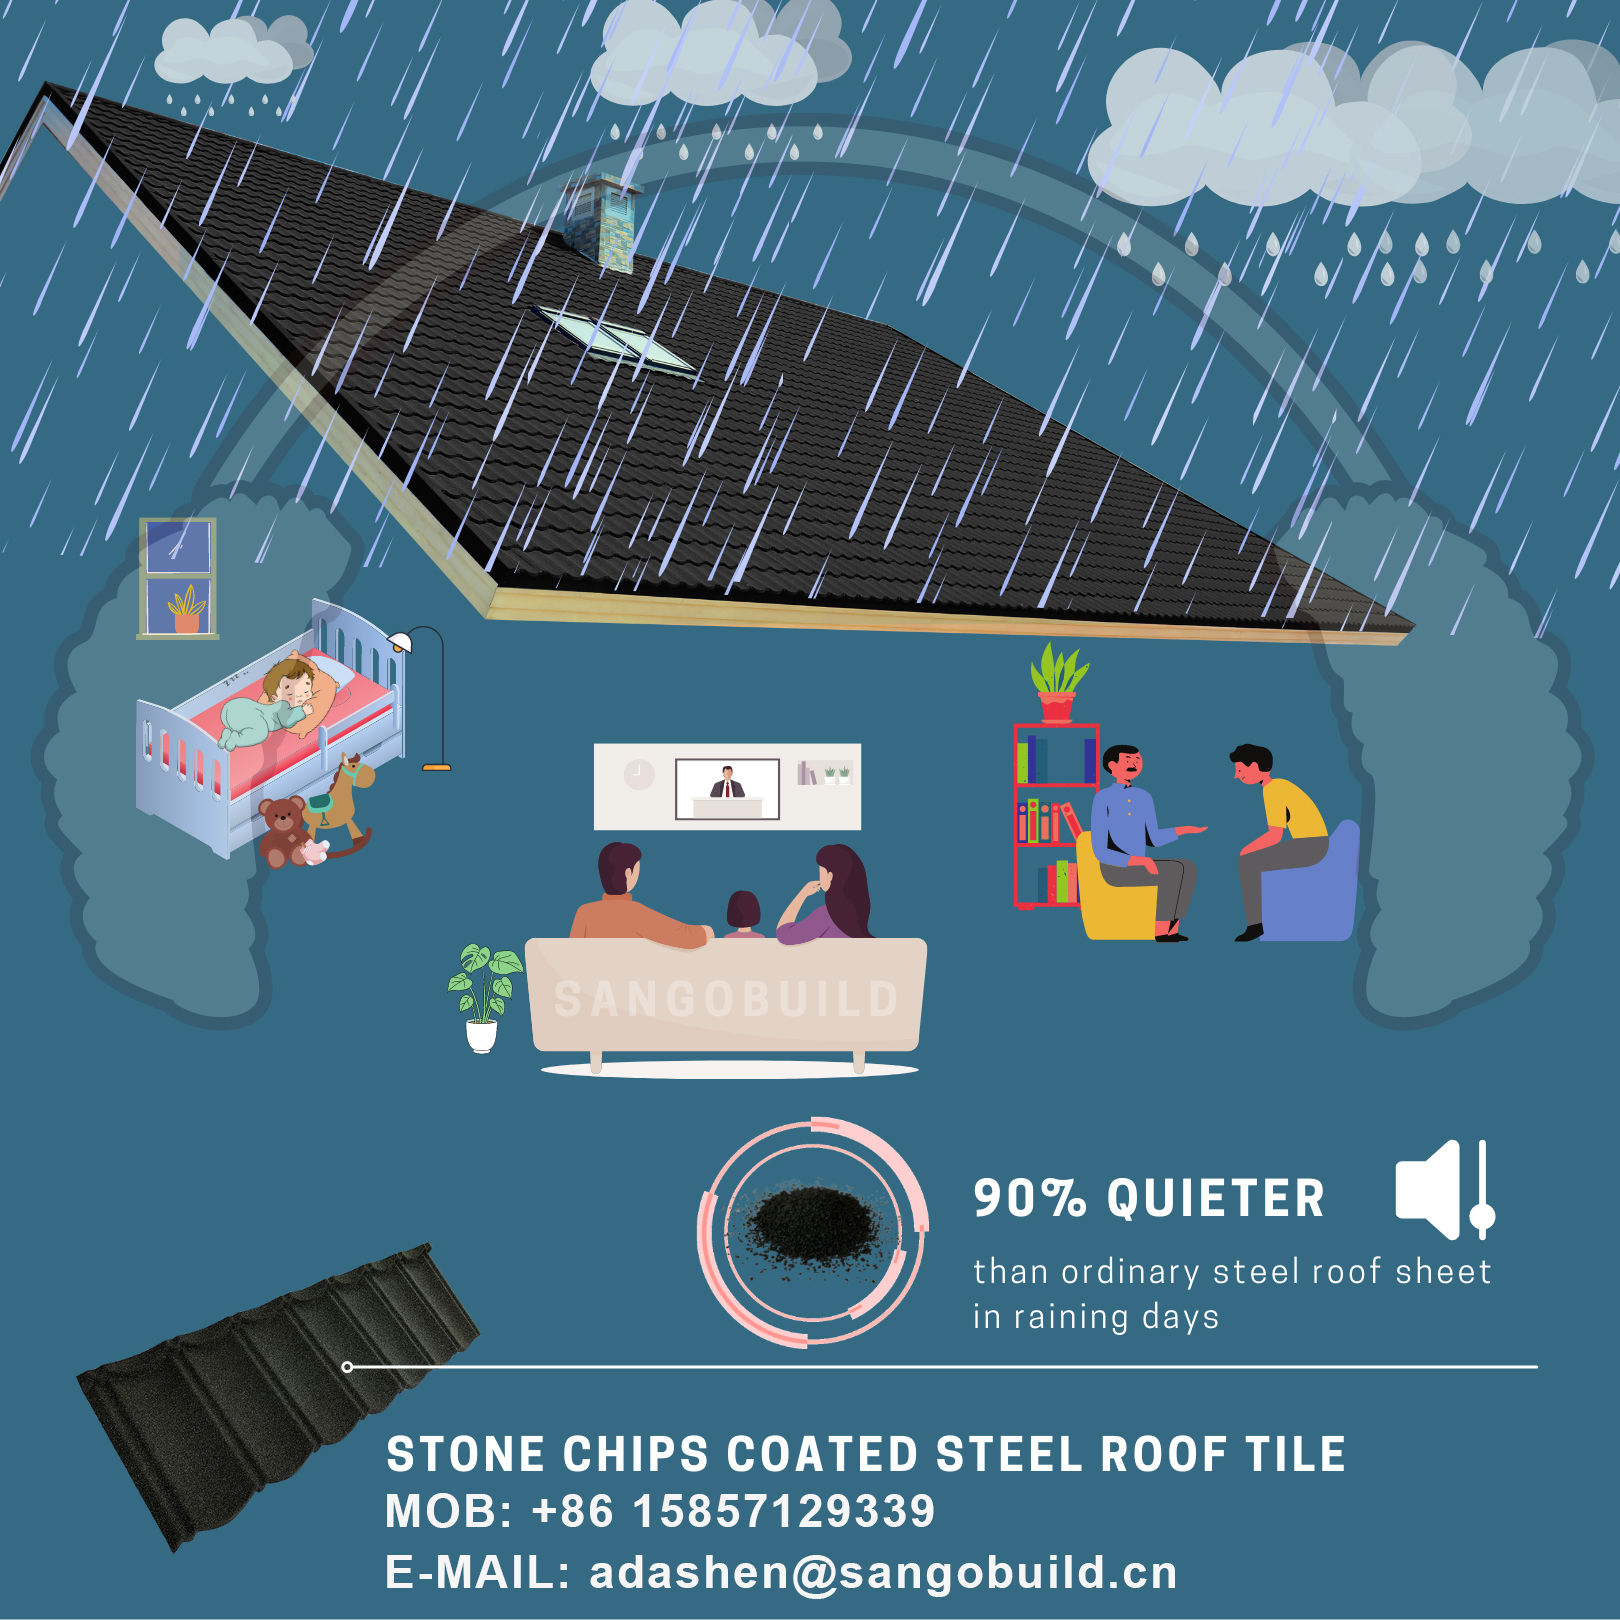 TWO ADVANTAGE OF STONE COATED METAL ROOF TILES MORE CUSTOMER CONCERN POINTS